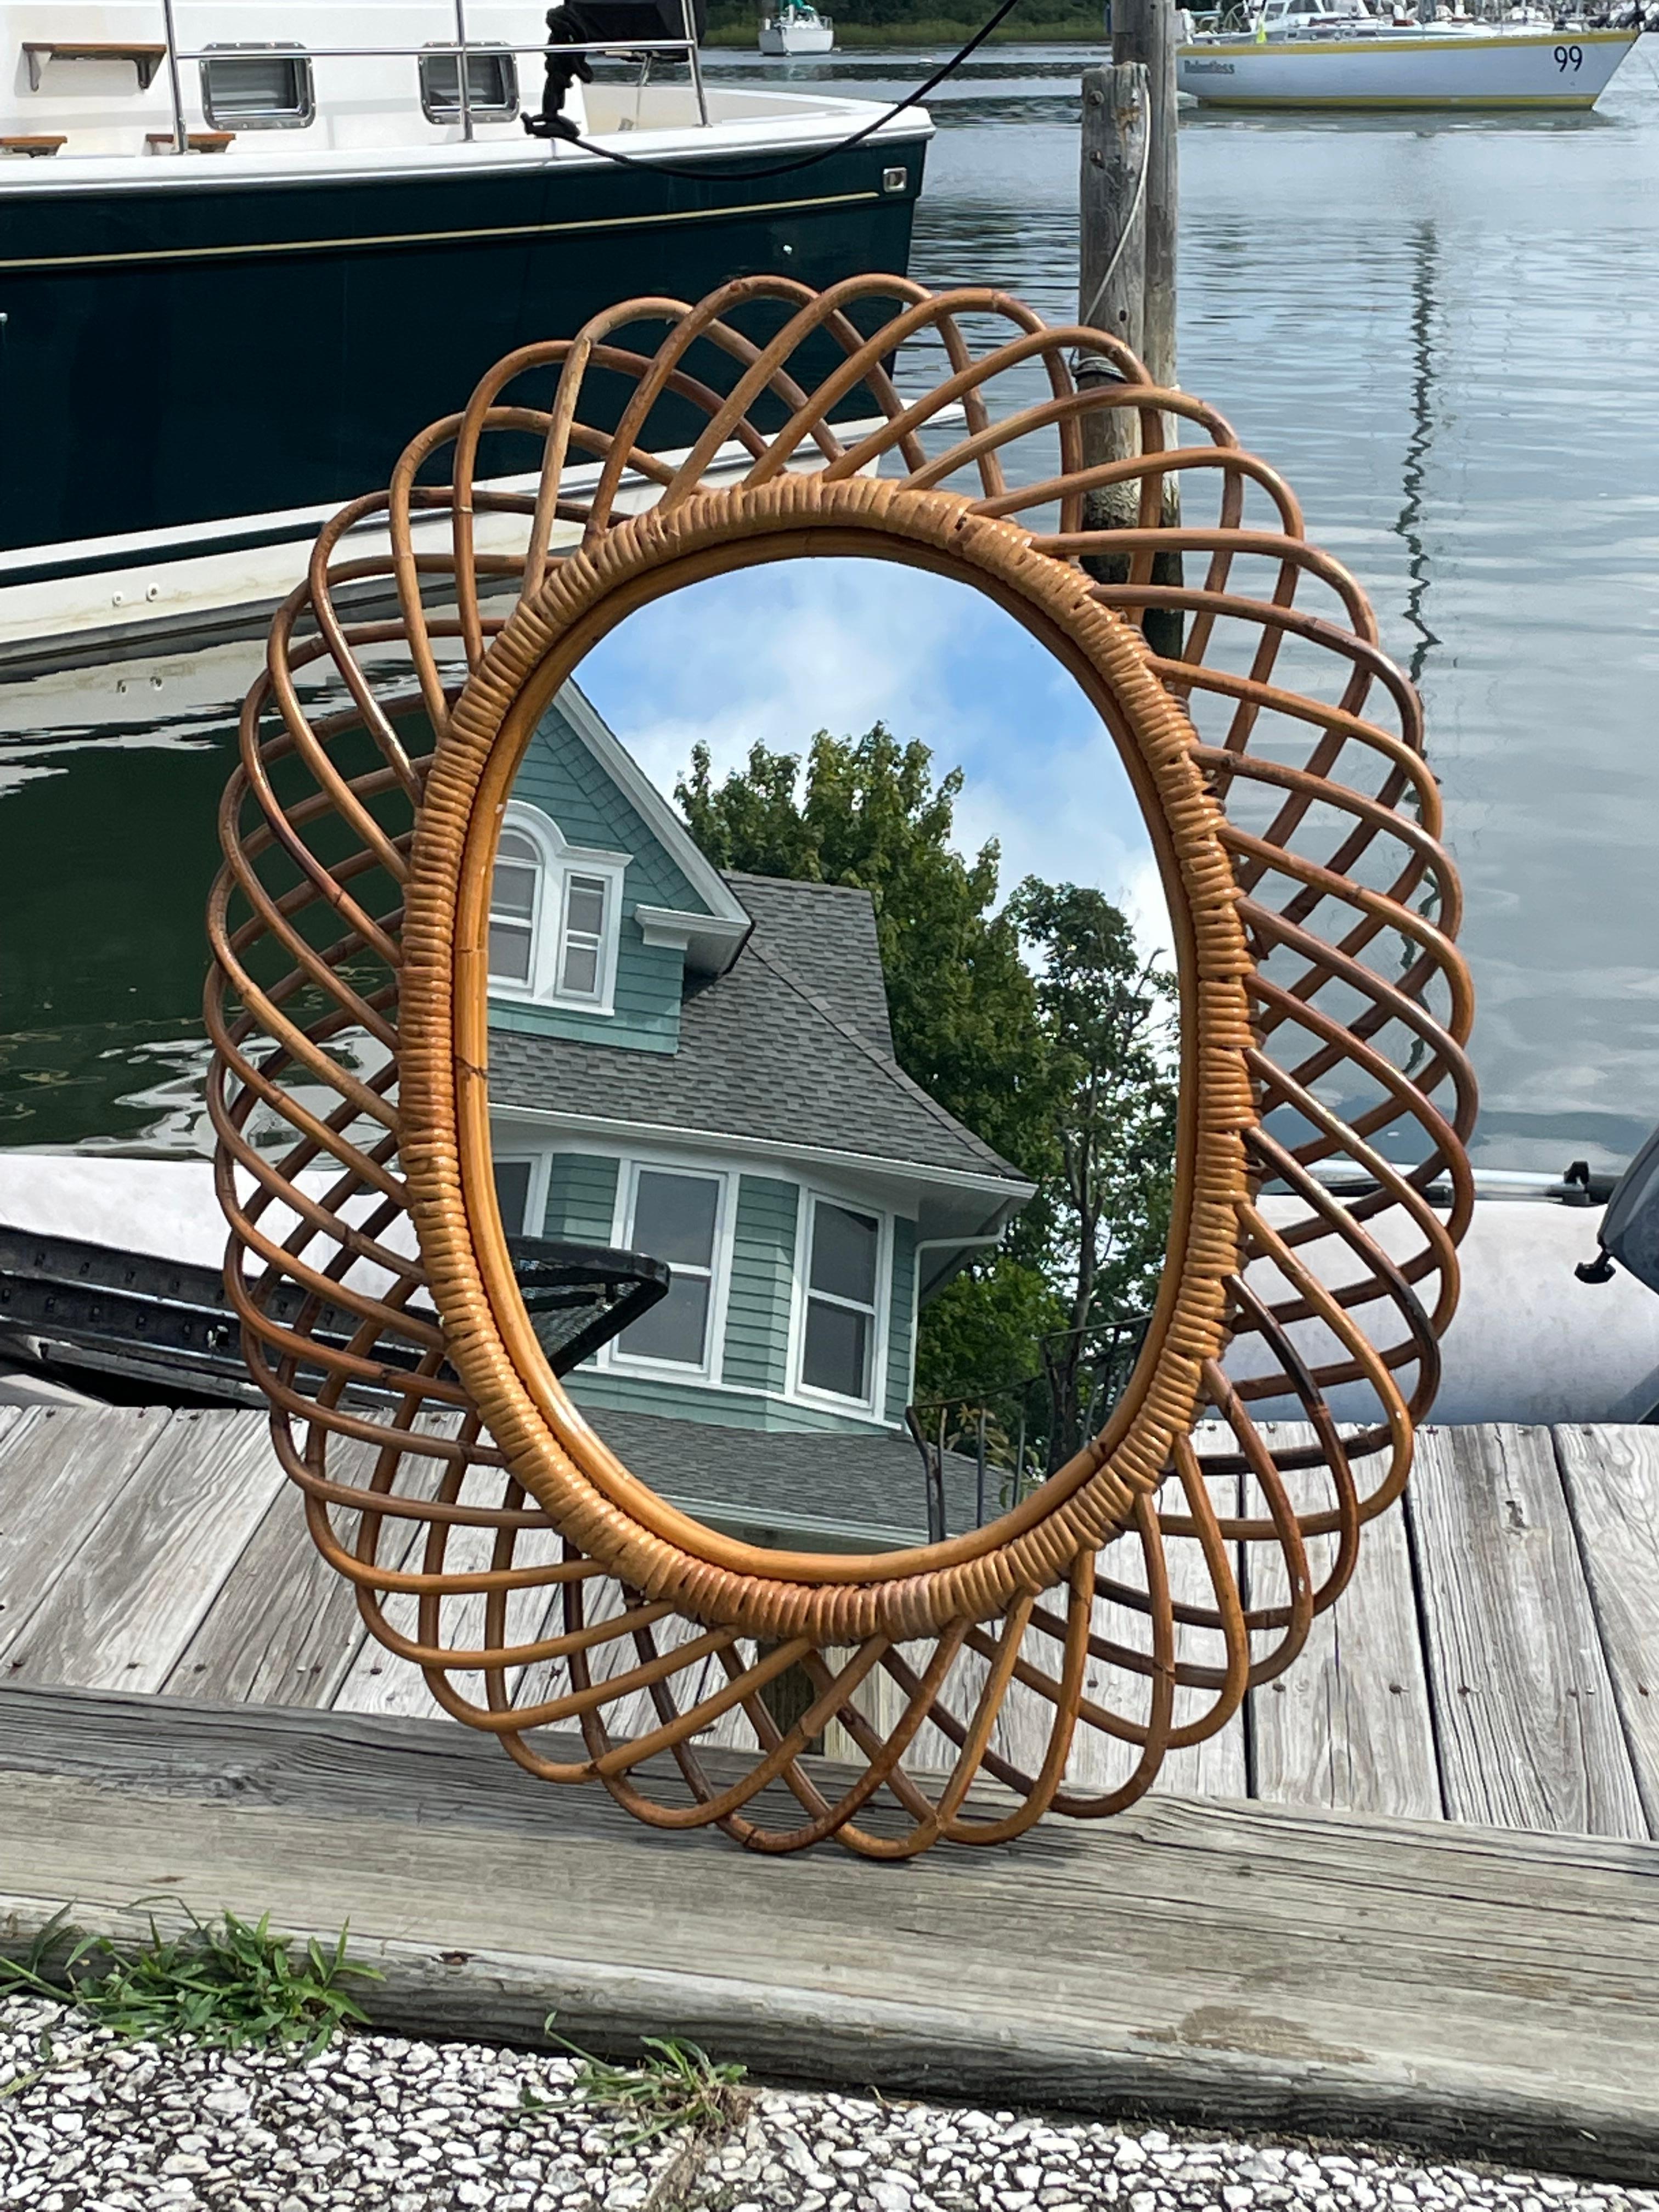 Beautiful bamboo and rattan oval Sunburst mirror . This Italian designed Franco Albini style features looping bamboo held into rattan bands around the large mirror . These handcrafted mirrors were typical in Italy in the 1950s-1970s. This one has